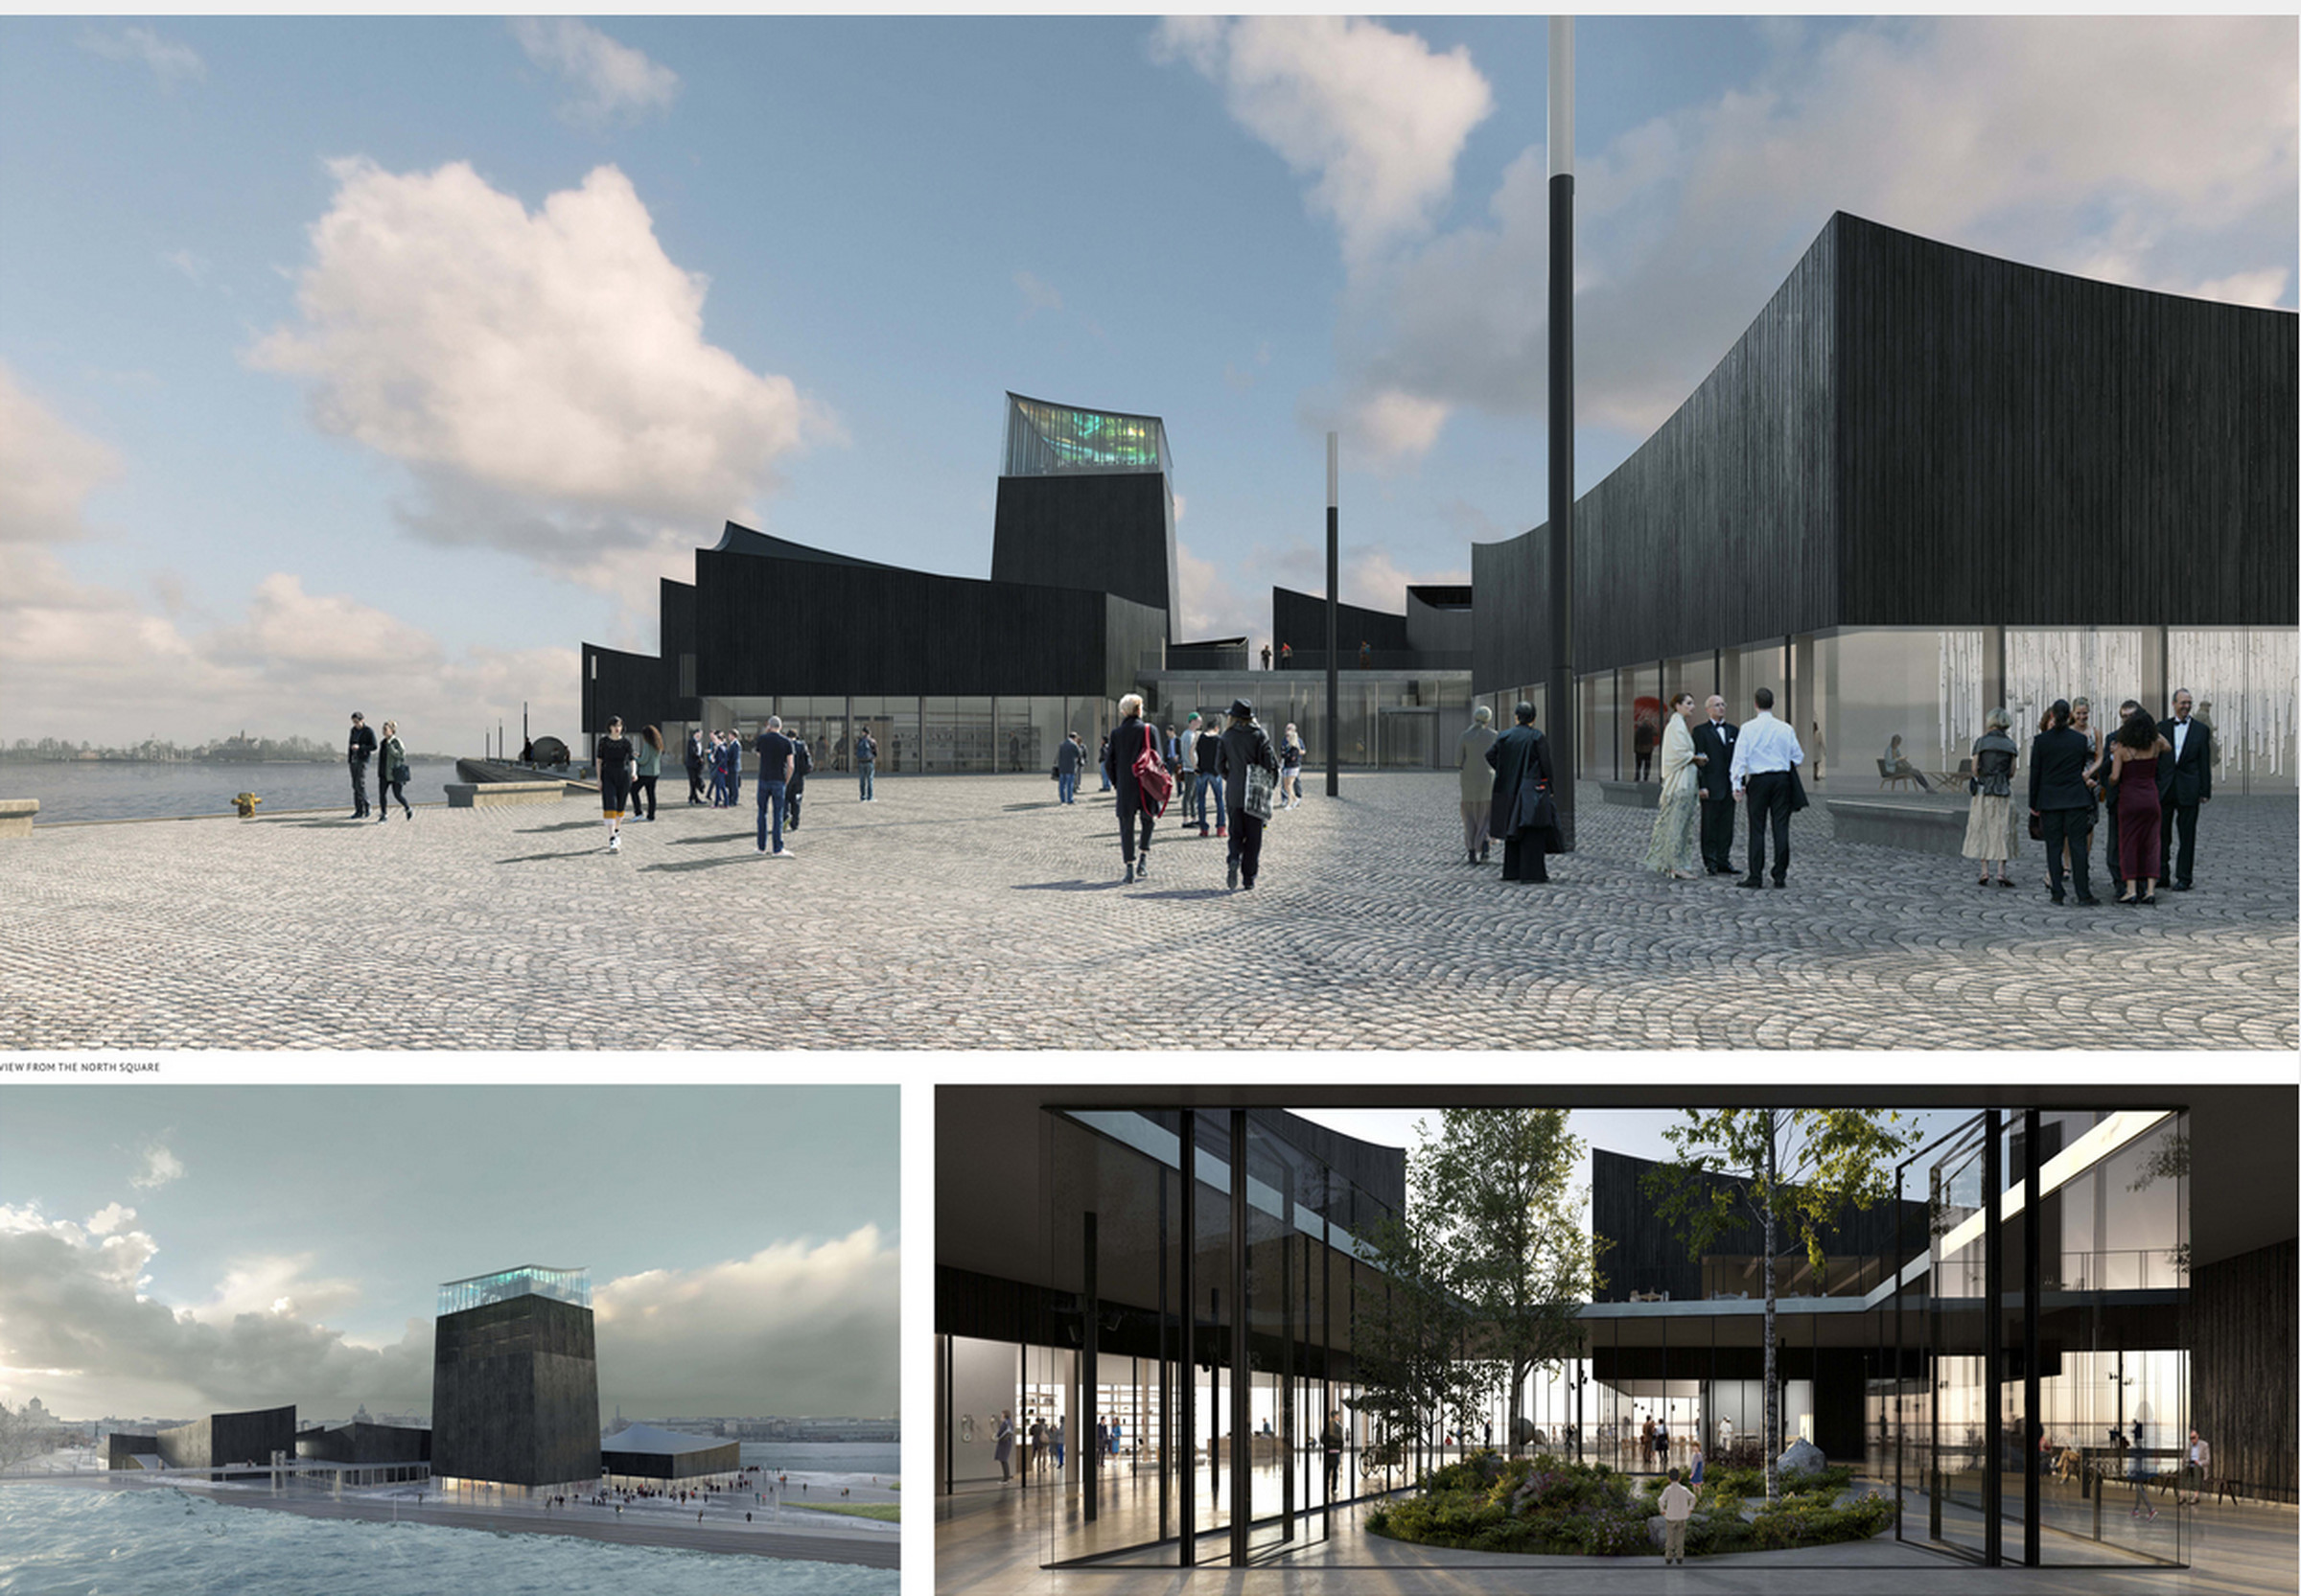 Guggenheim Helsinki will be made from charred timber